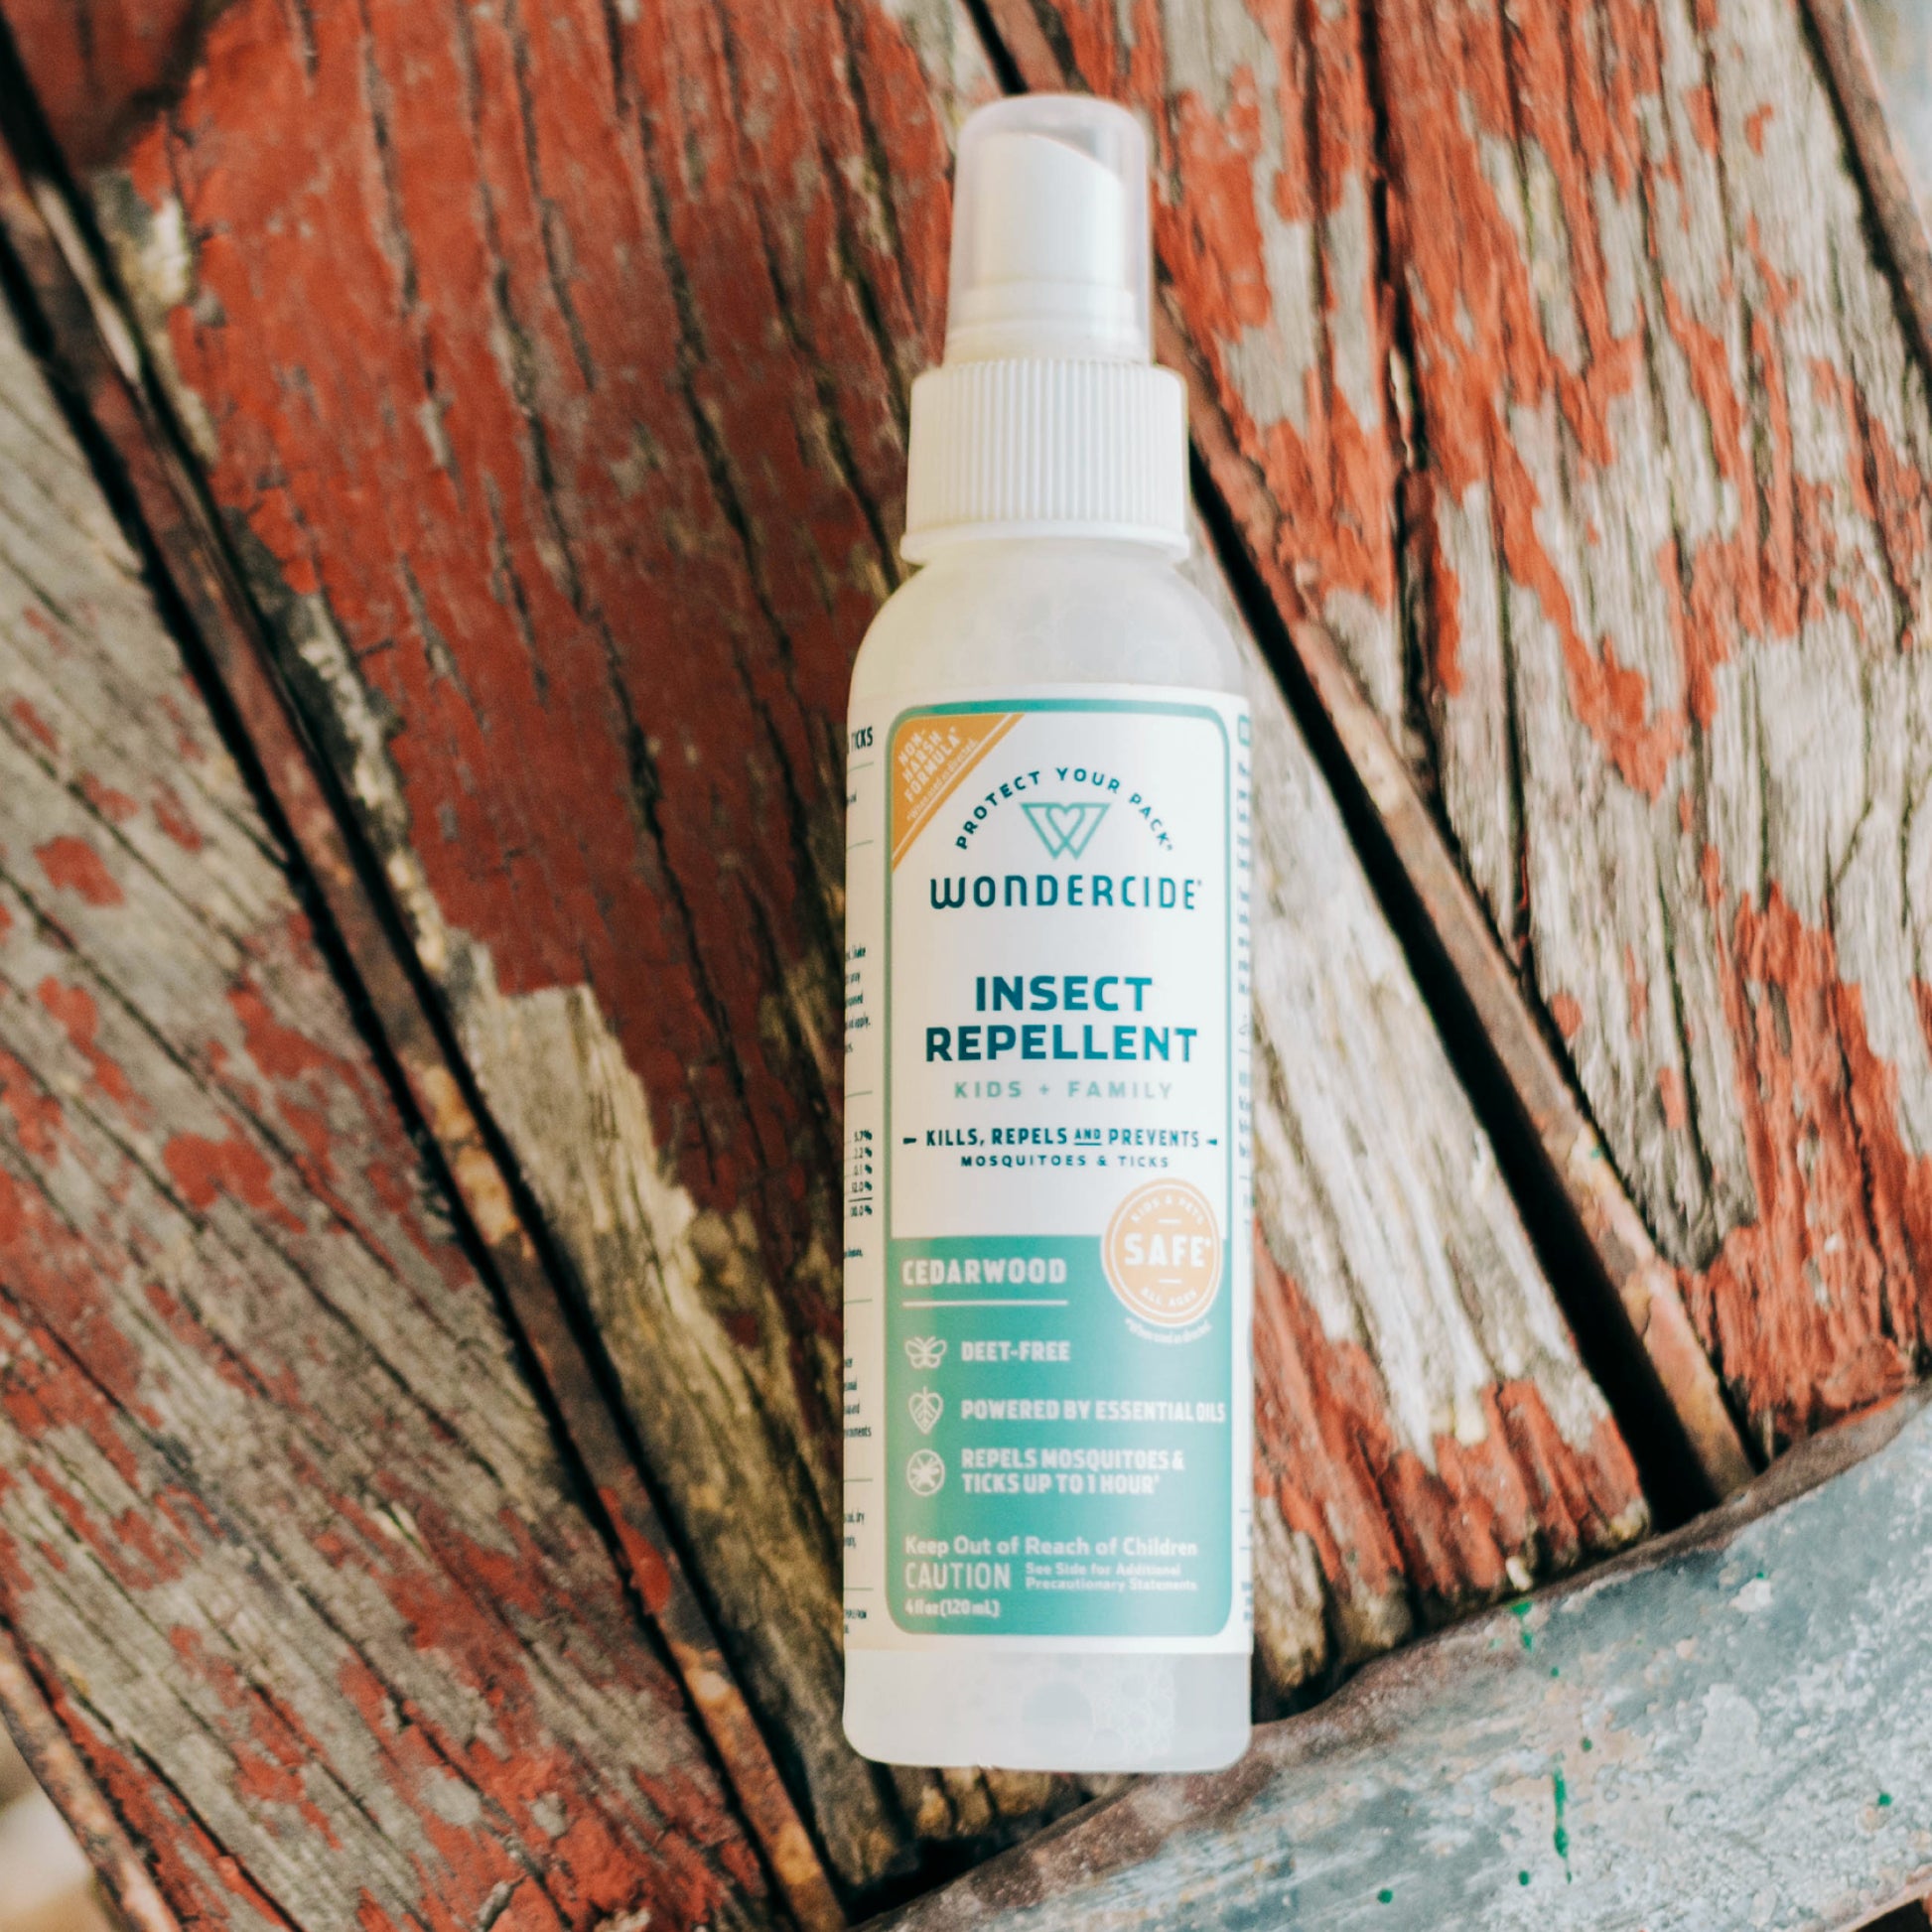 Wondercide Insect Repellent